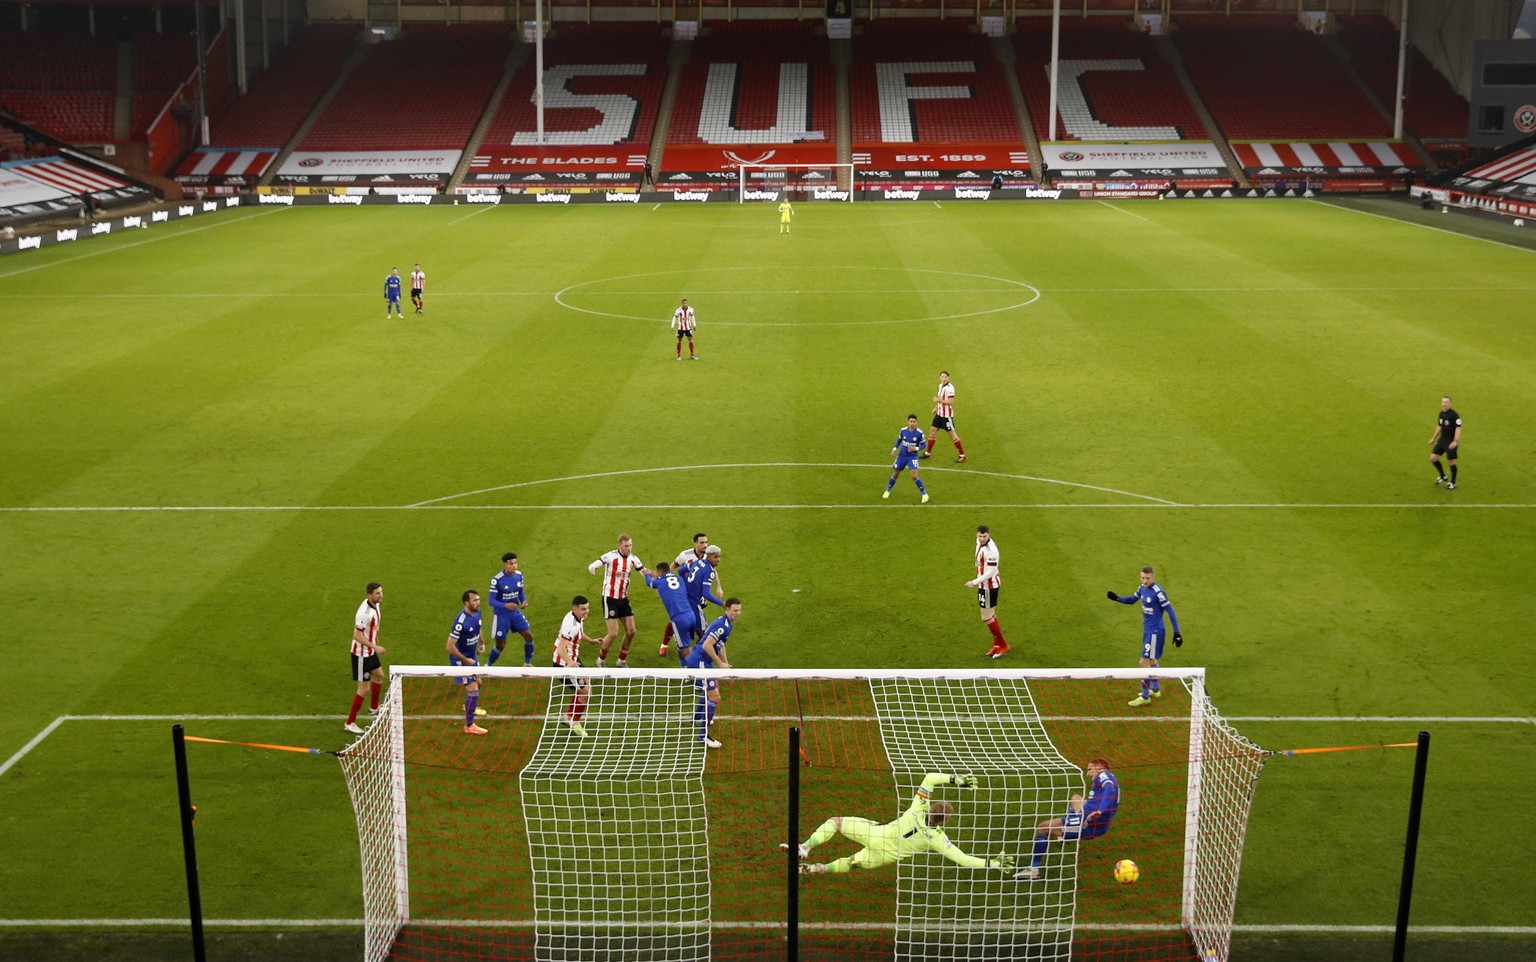 Oli McBurnie of Sheffield Utd scoring his sides opening goal during the Premier League match at Bramall Lane, Sheffield. Picture date: 6th December 2020. Picture credit should read: Darren Staples/Spo ...